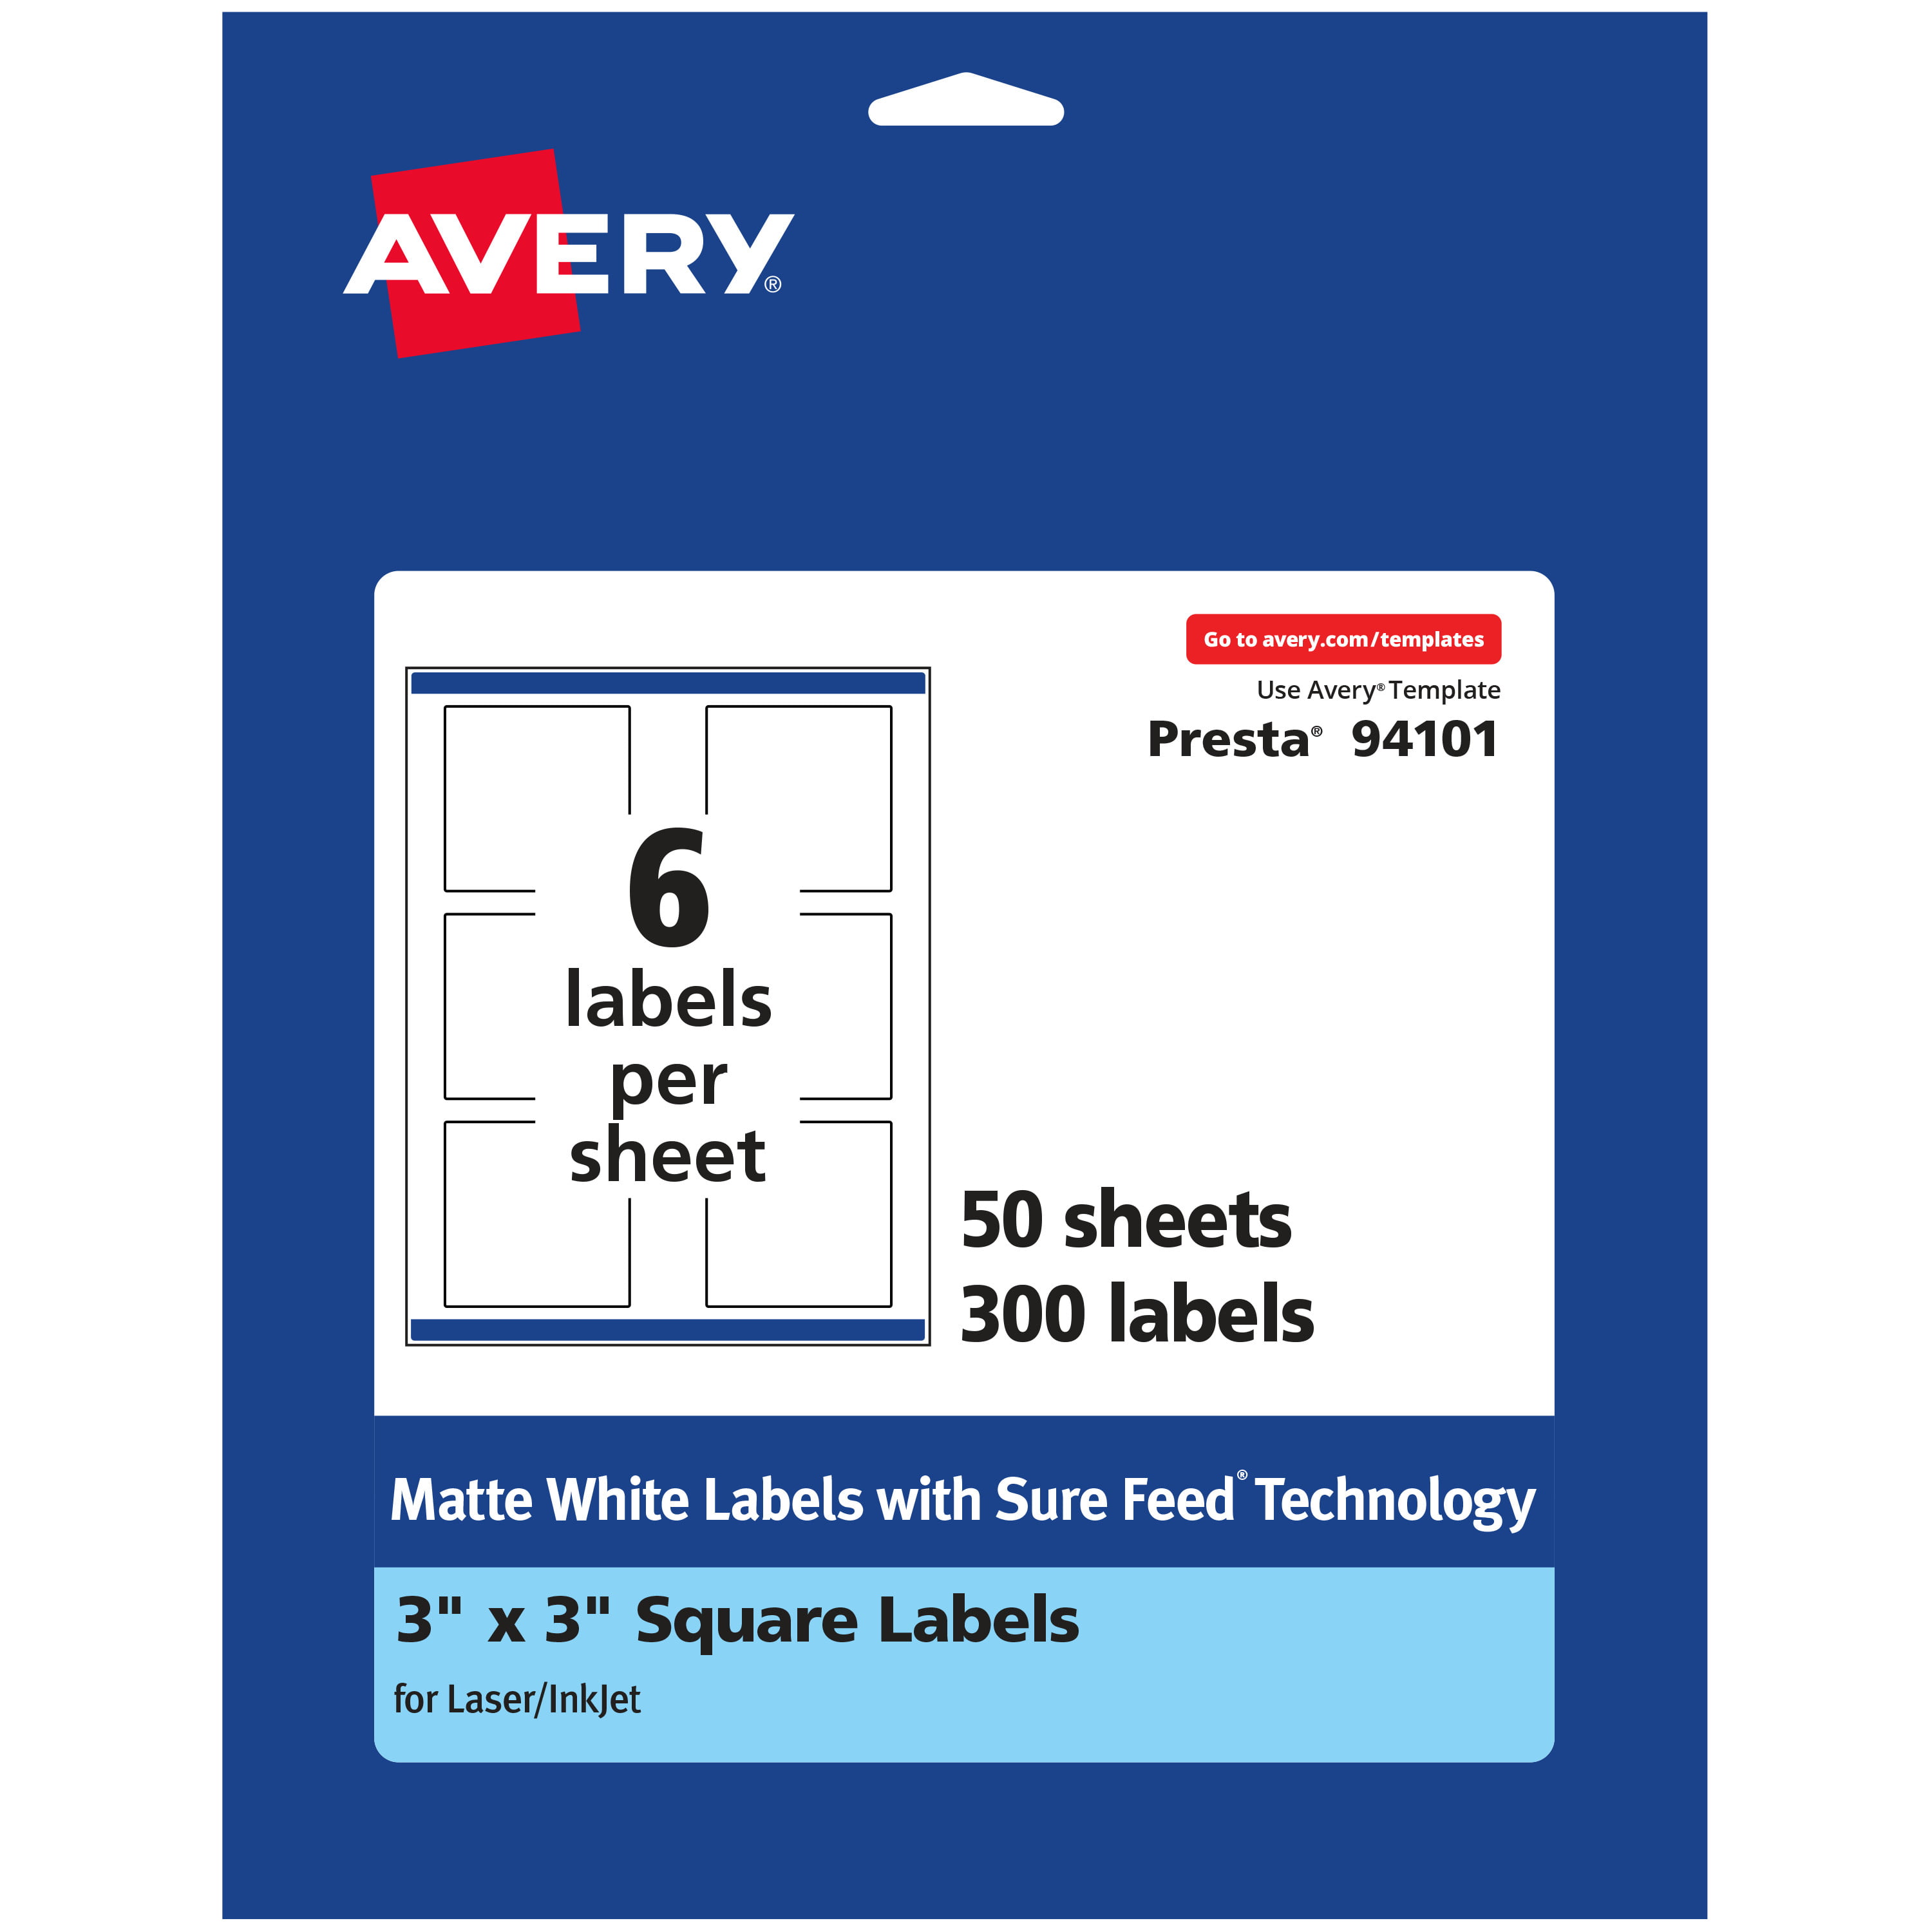 Avery Matte White Square Labels, 3" x 3", 300 Labels